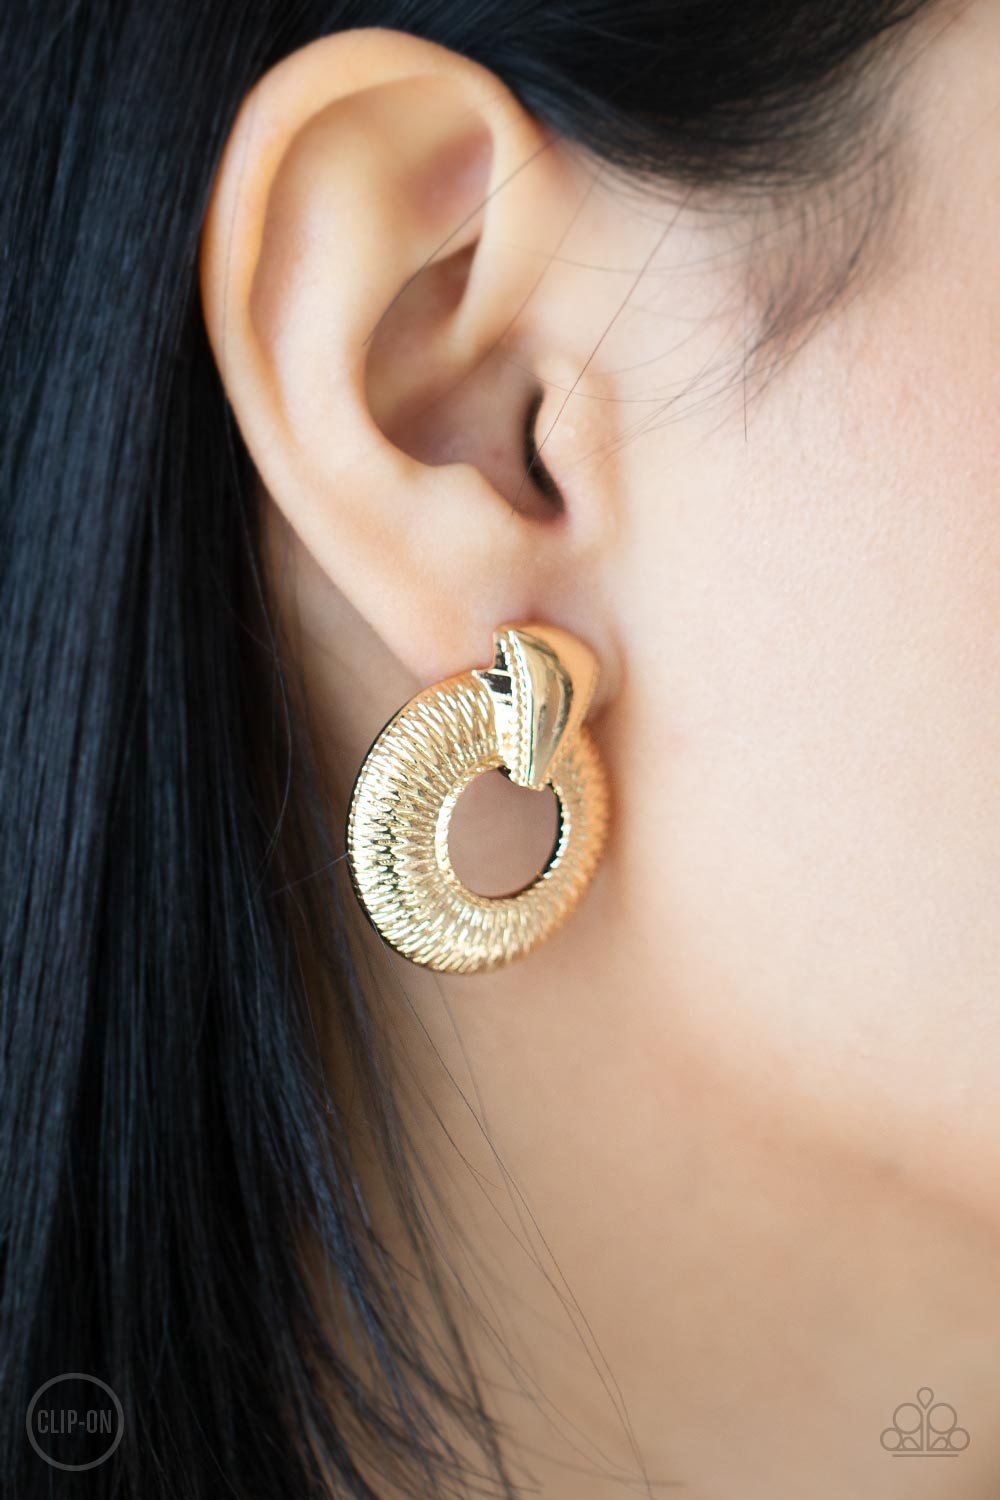 Paparazzi Industrial Innovator - Gold Earrings $5 Jewelry. Subscribe & Save. #P5CO-GDXX-061XX